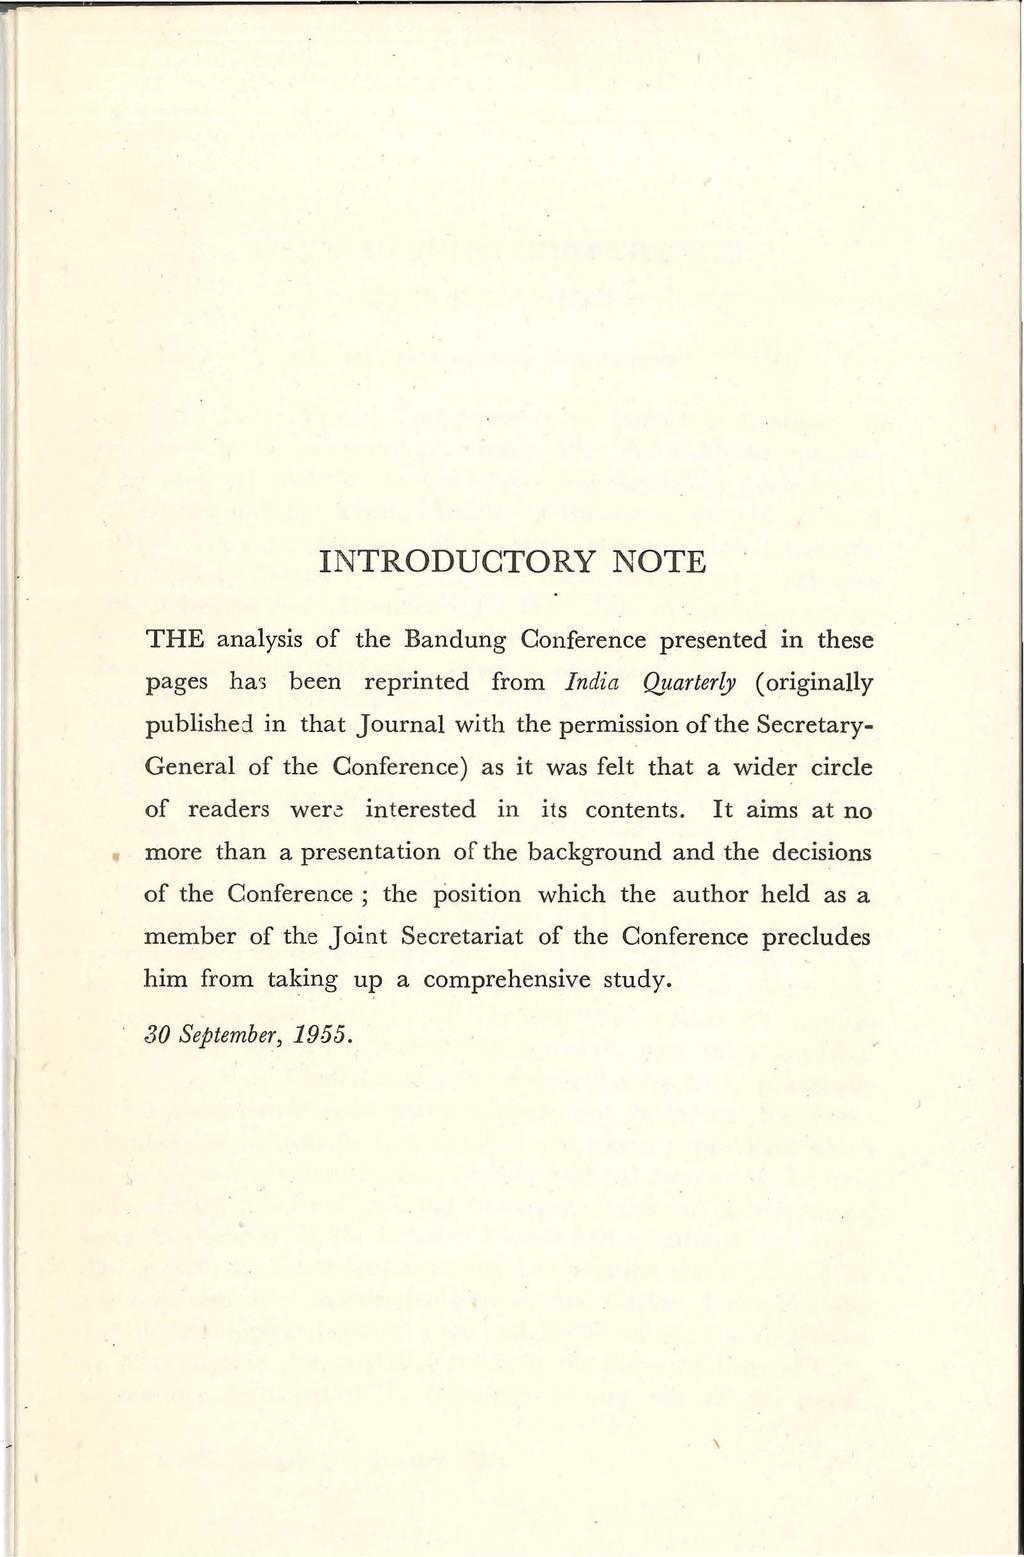 INTRODUCTORY NOTE THE analysis of the Bandung Conference presented in these pages ha, been reprinted from India Quarterly ( originally published in that Journal with the permission of the Secretary